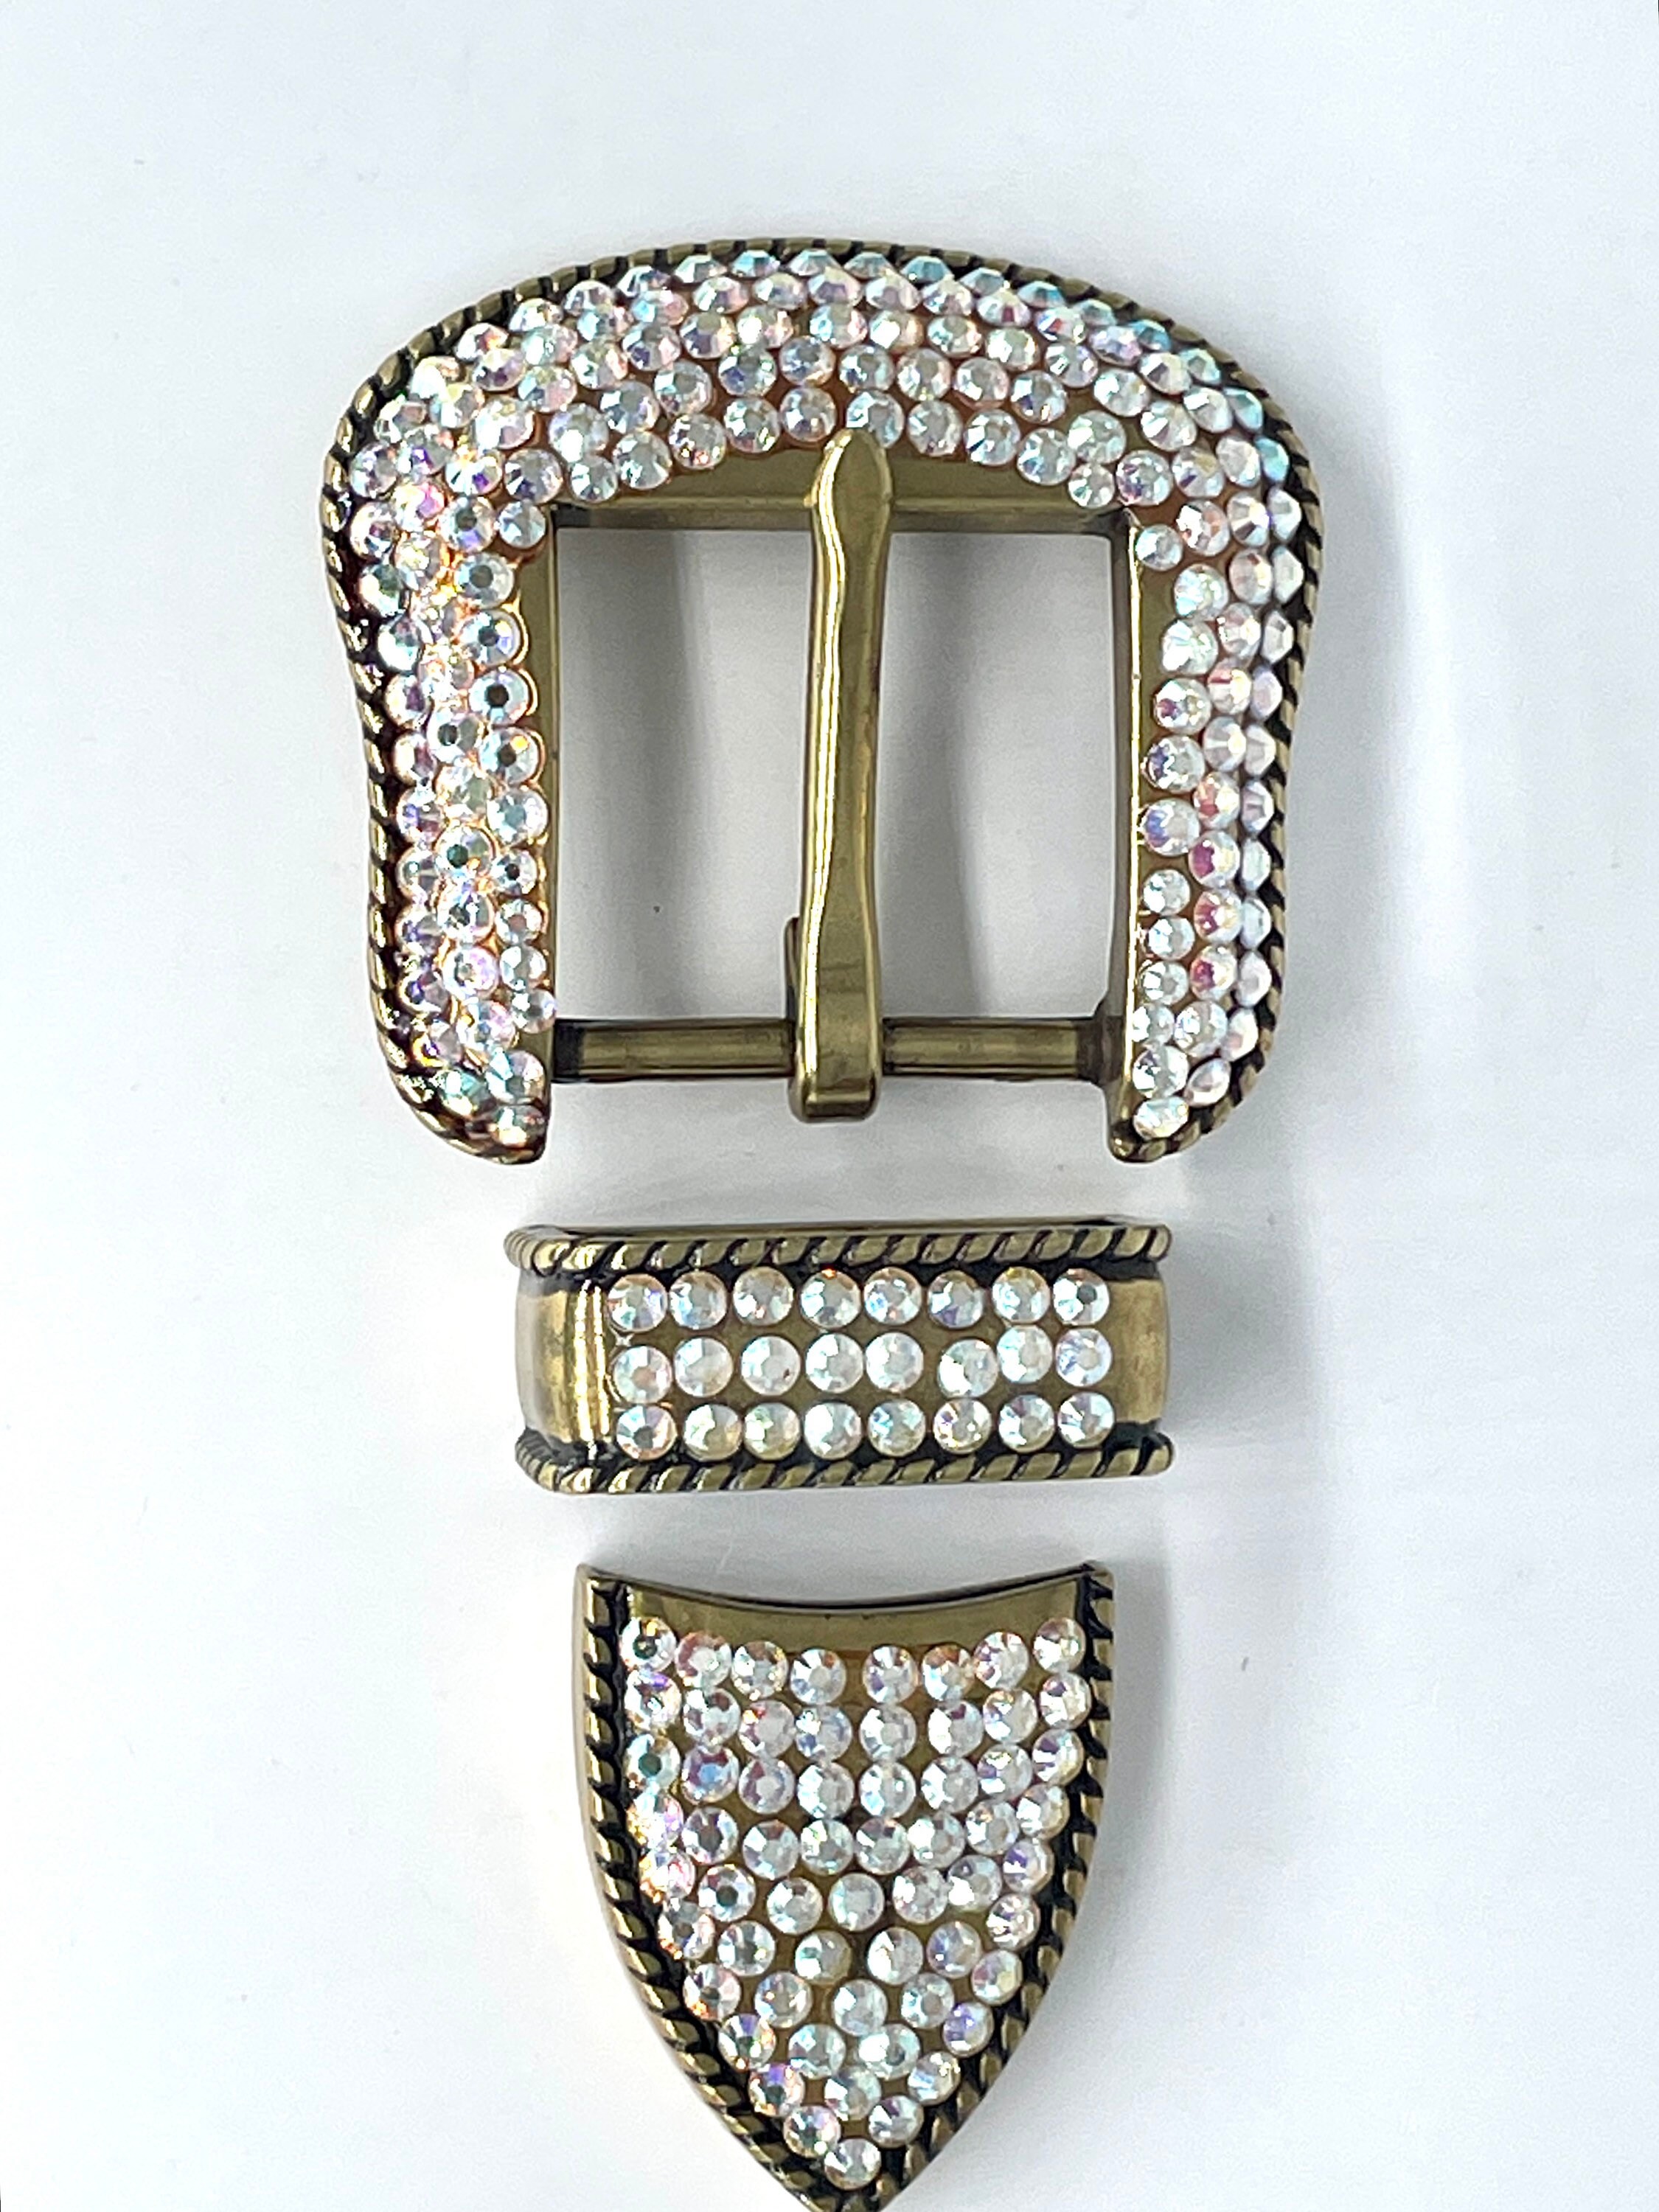 KIPPYS MEDIUM SWAROVSKY BELT AND STUDS WITH DECORATED BUCKLE Woman